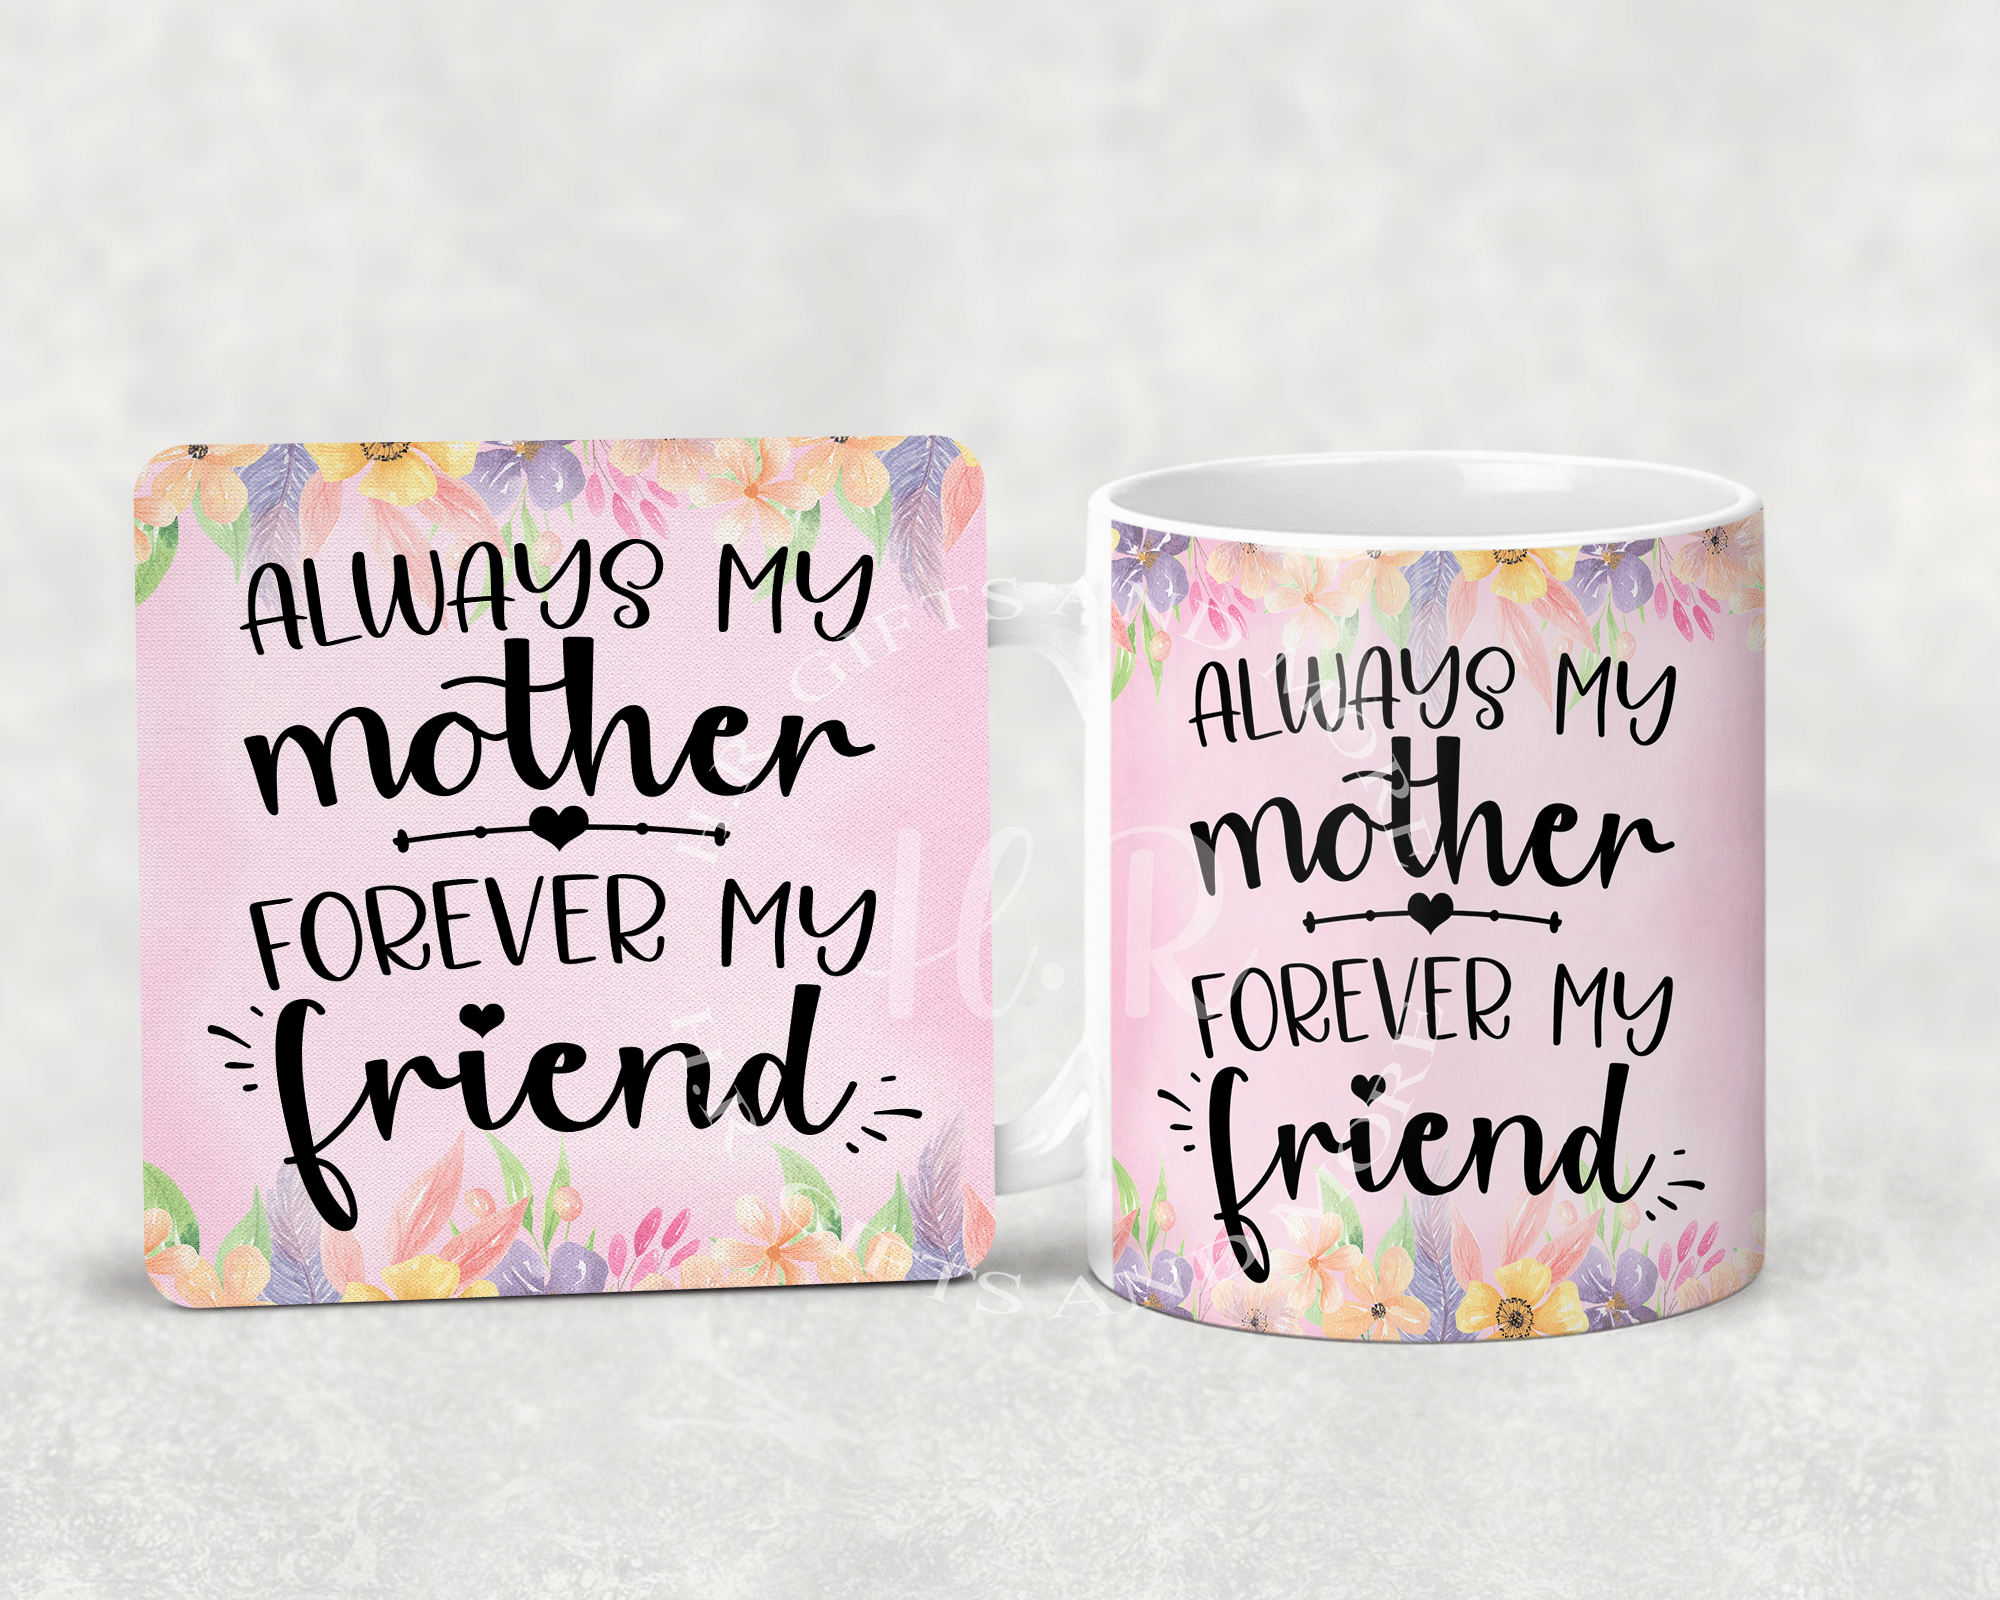 Always my mother, Forever my friend Mug and Coaster Set - main product image